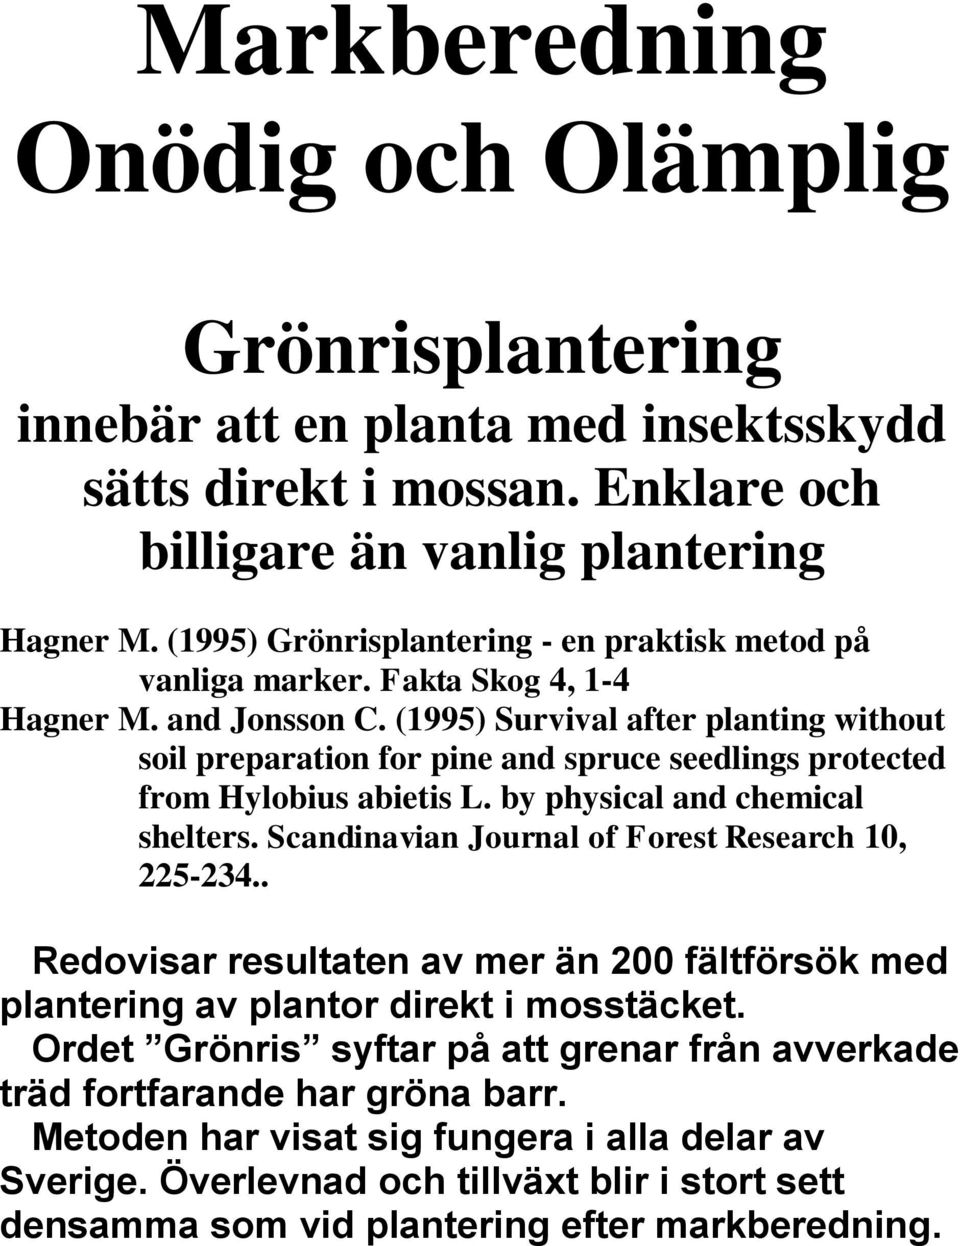 (1995) Survival after planting without soil preparation for pine and spruce seedlings protected from Hylobius abietis L. by physical and chemical shelters.